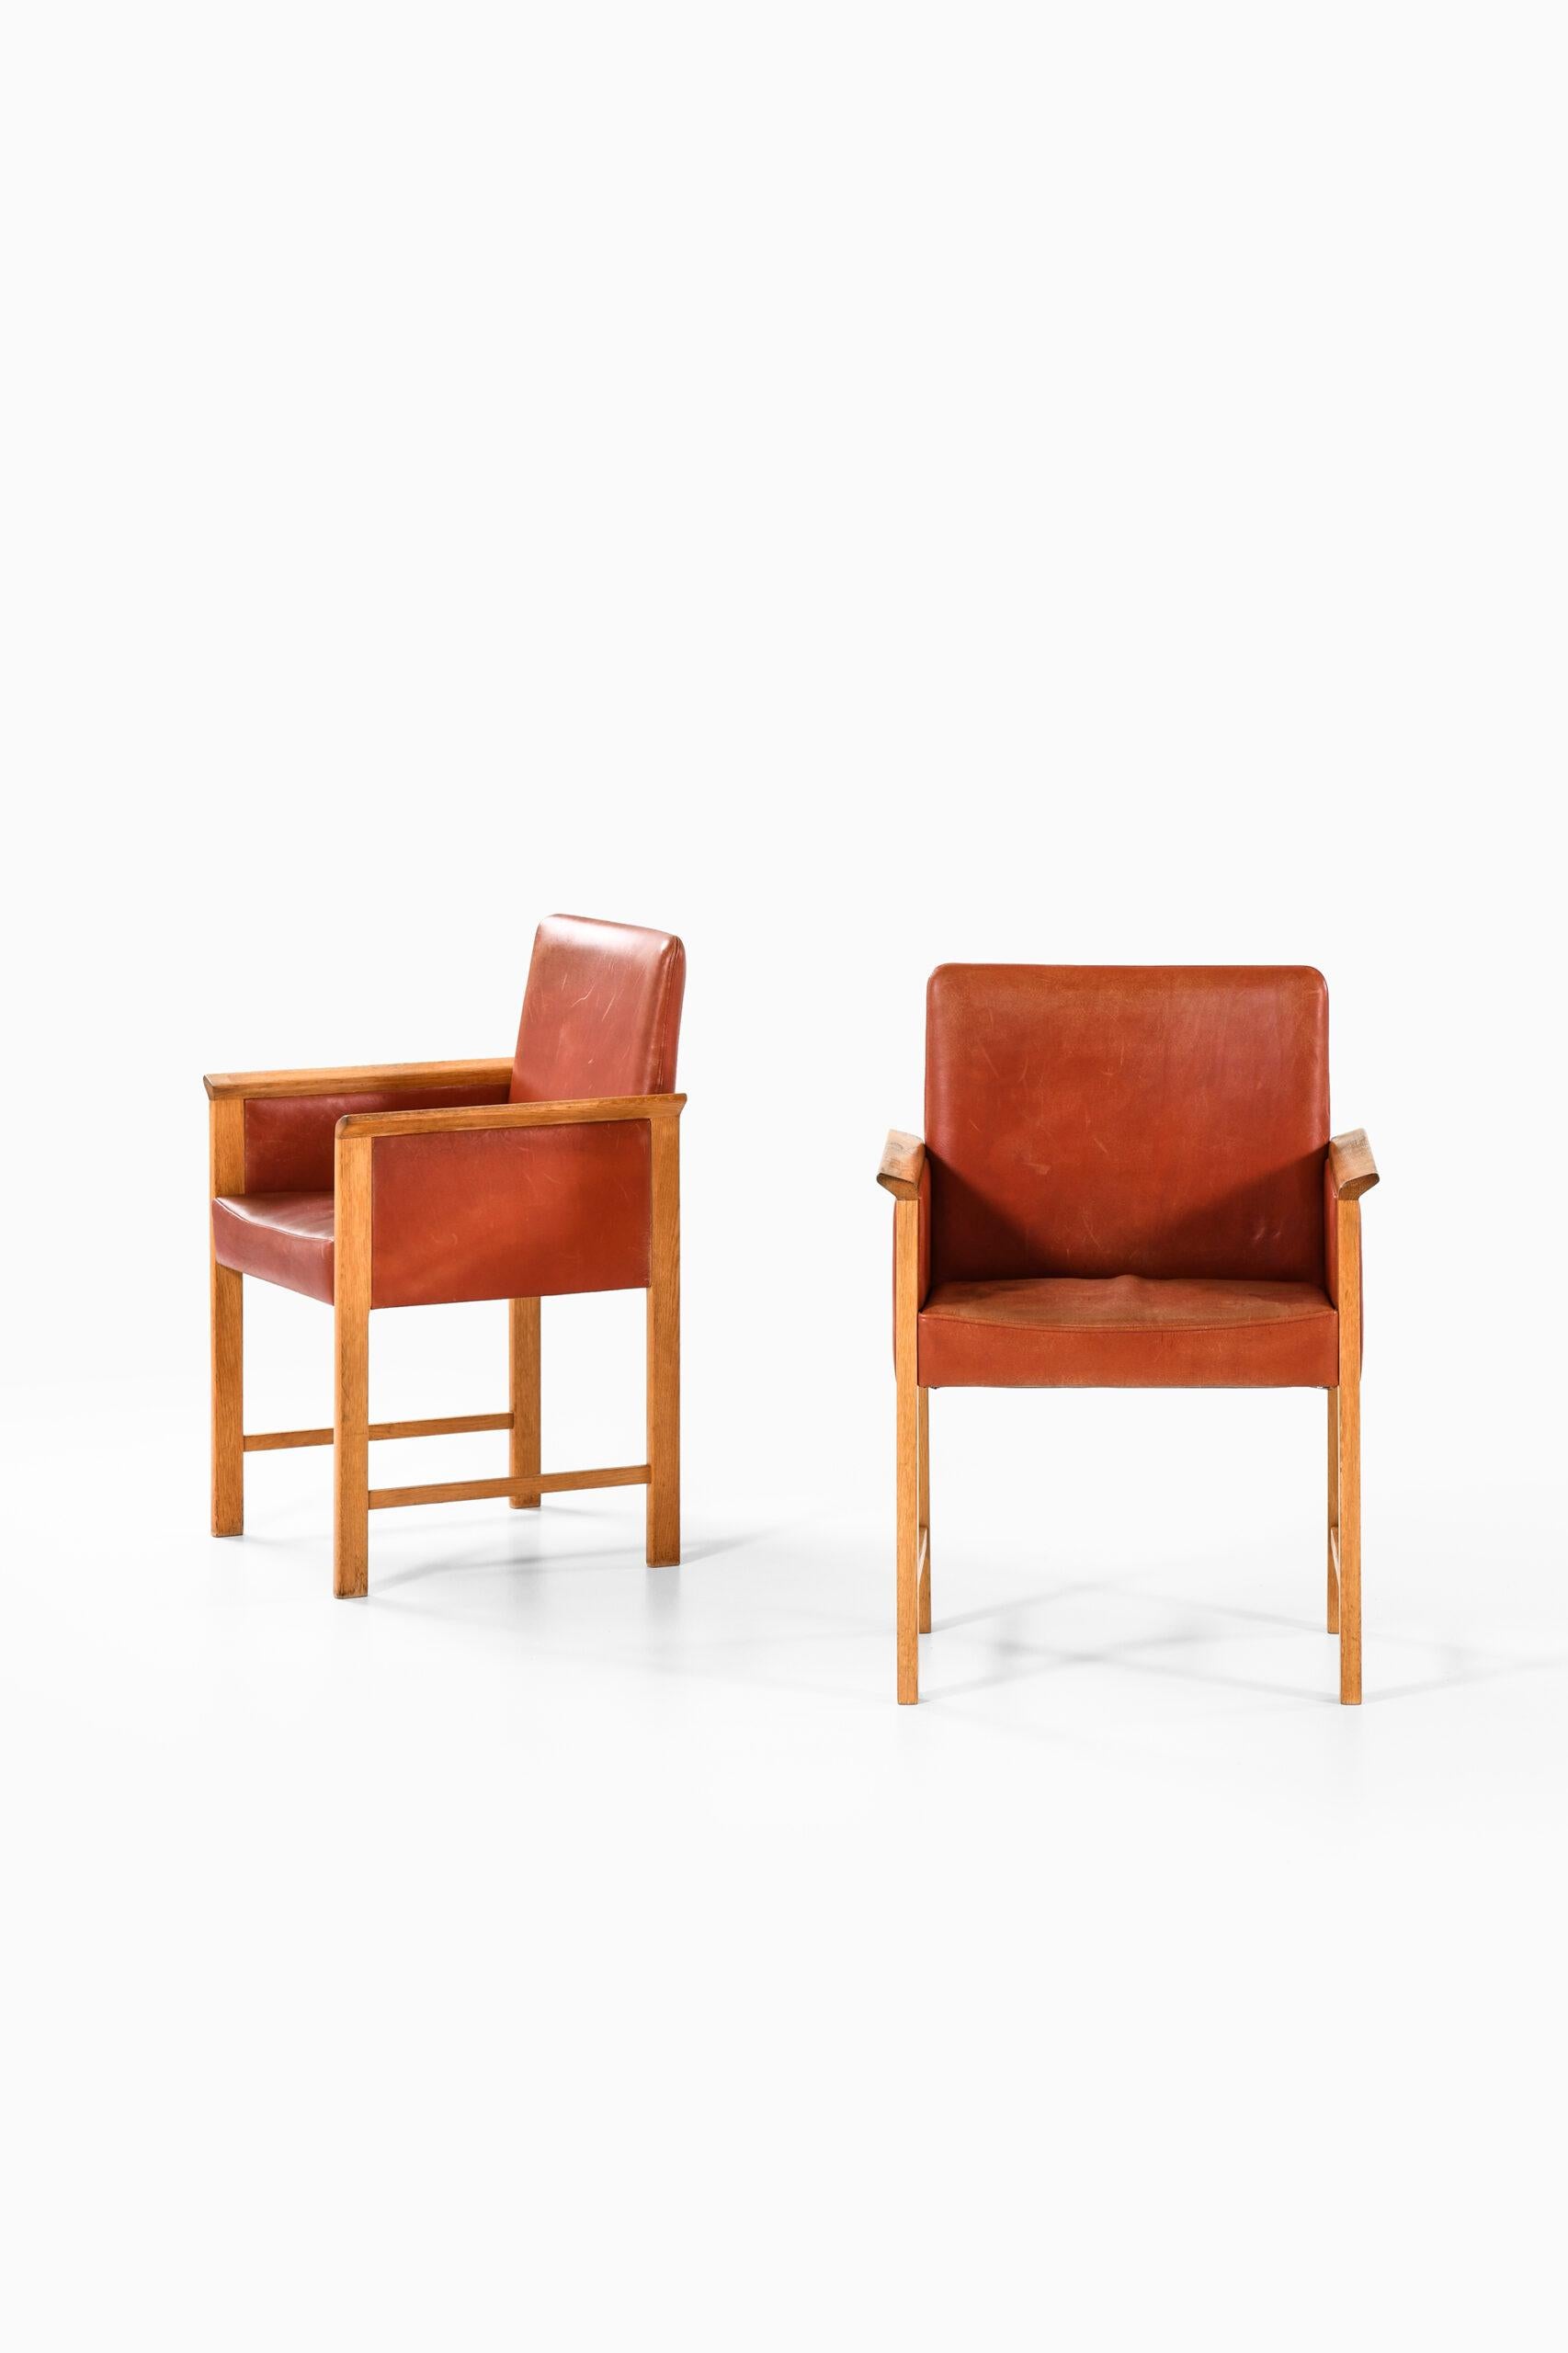 Rare armchairs by unknown designer. Produced in Denmark.